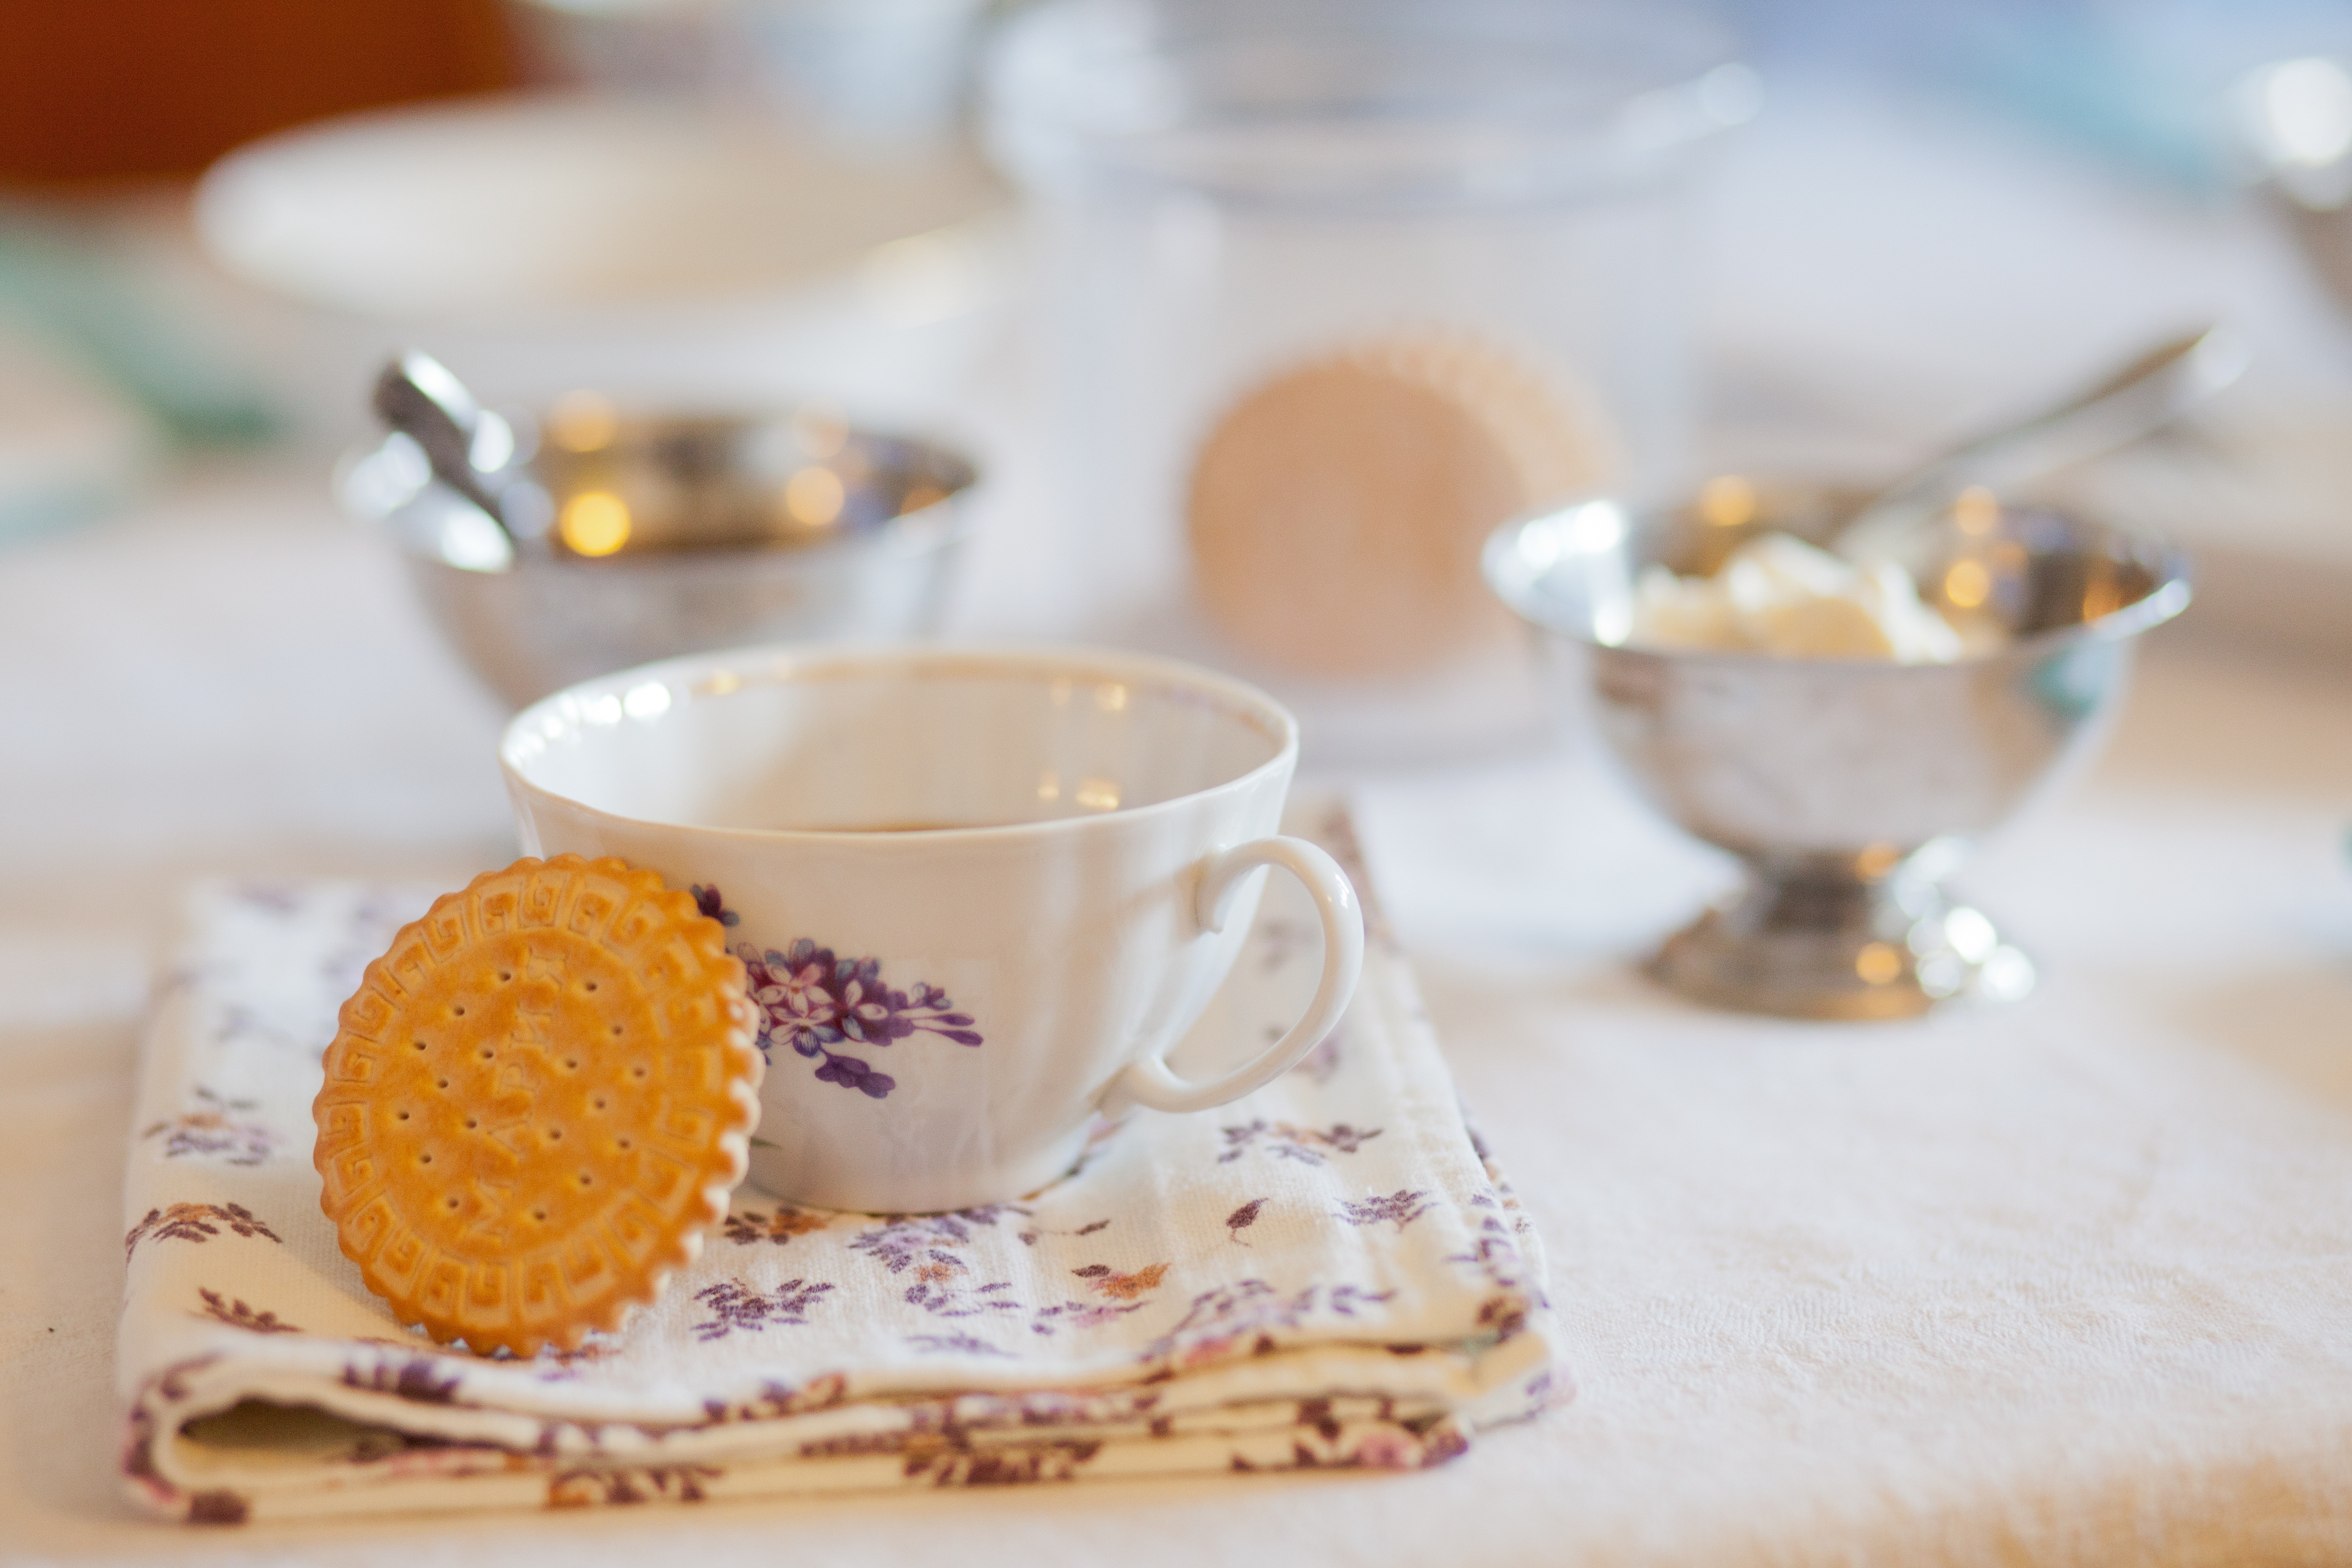 brown biscuit with white and purple floral ceramic teacup